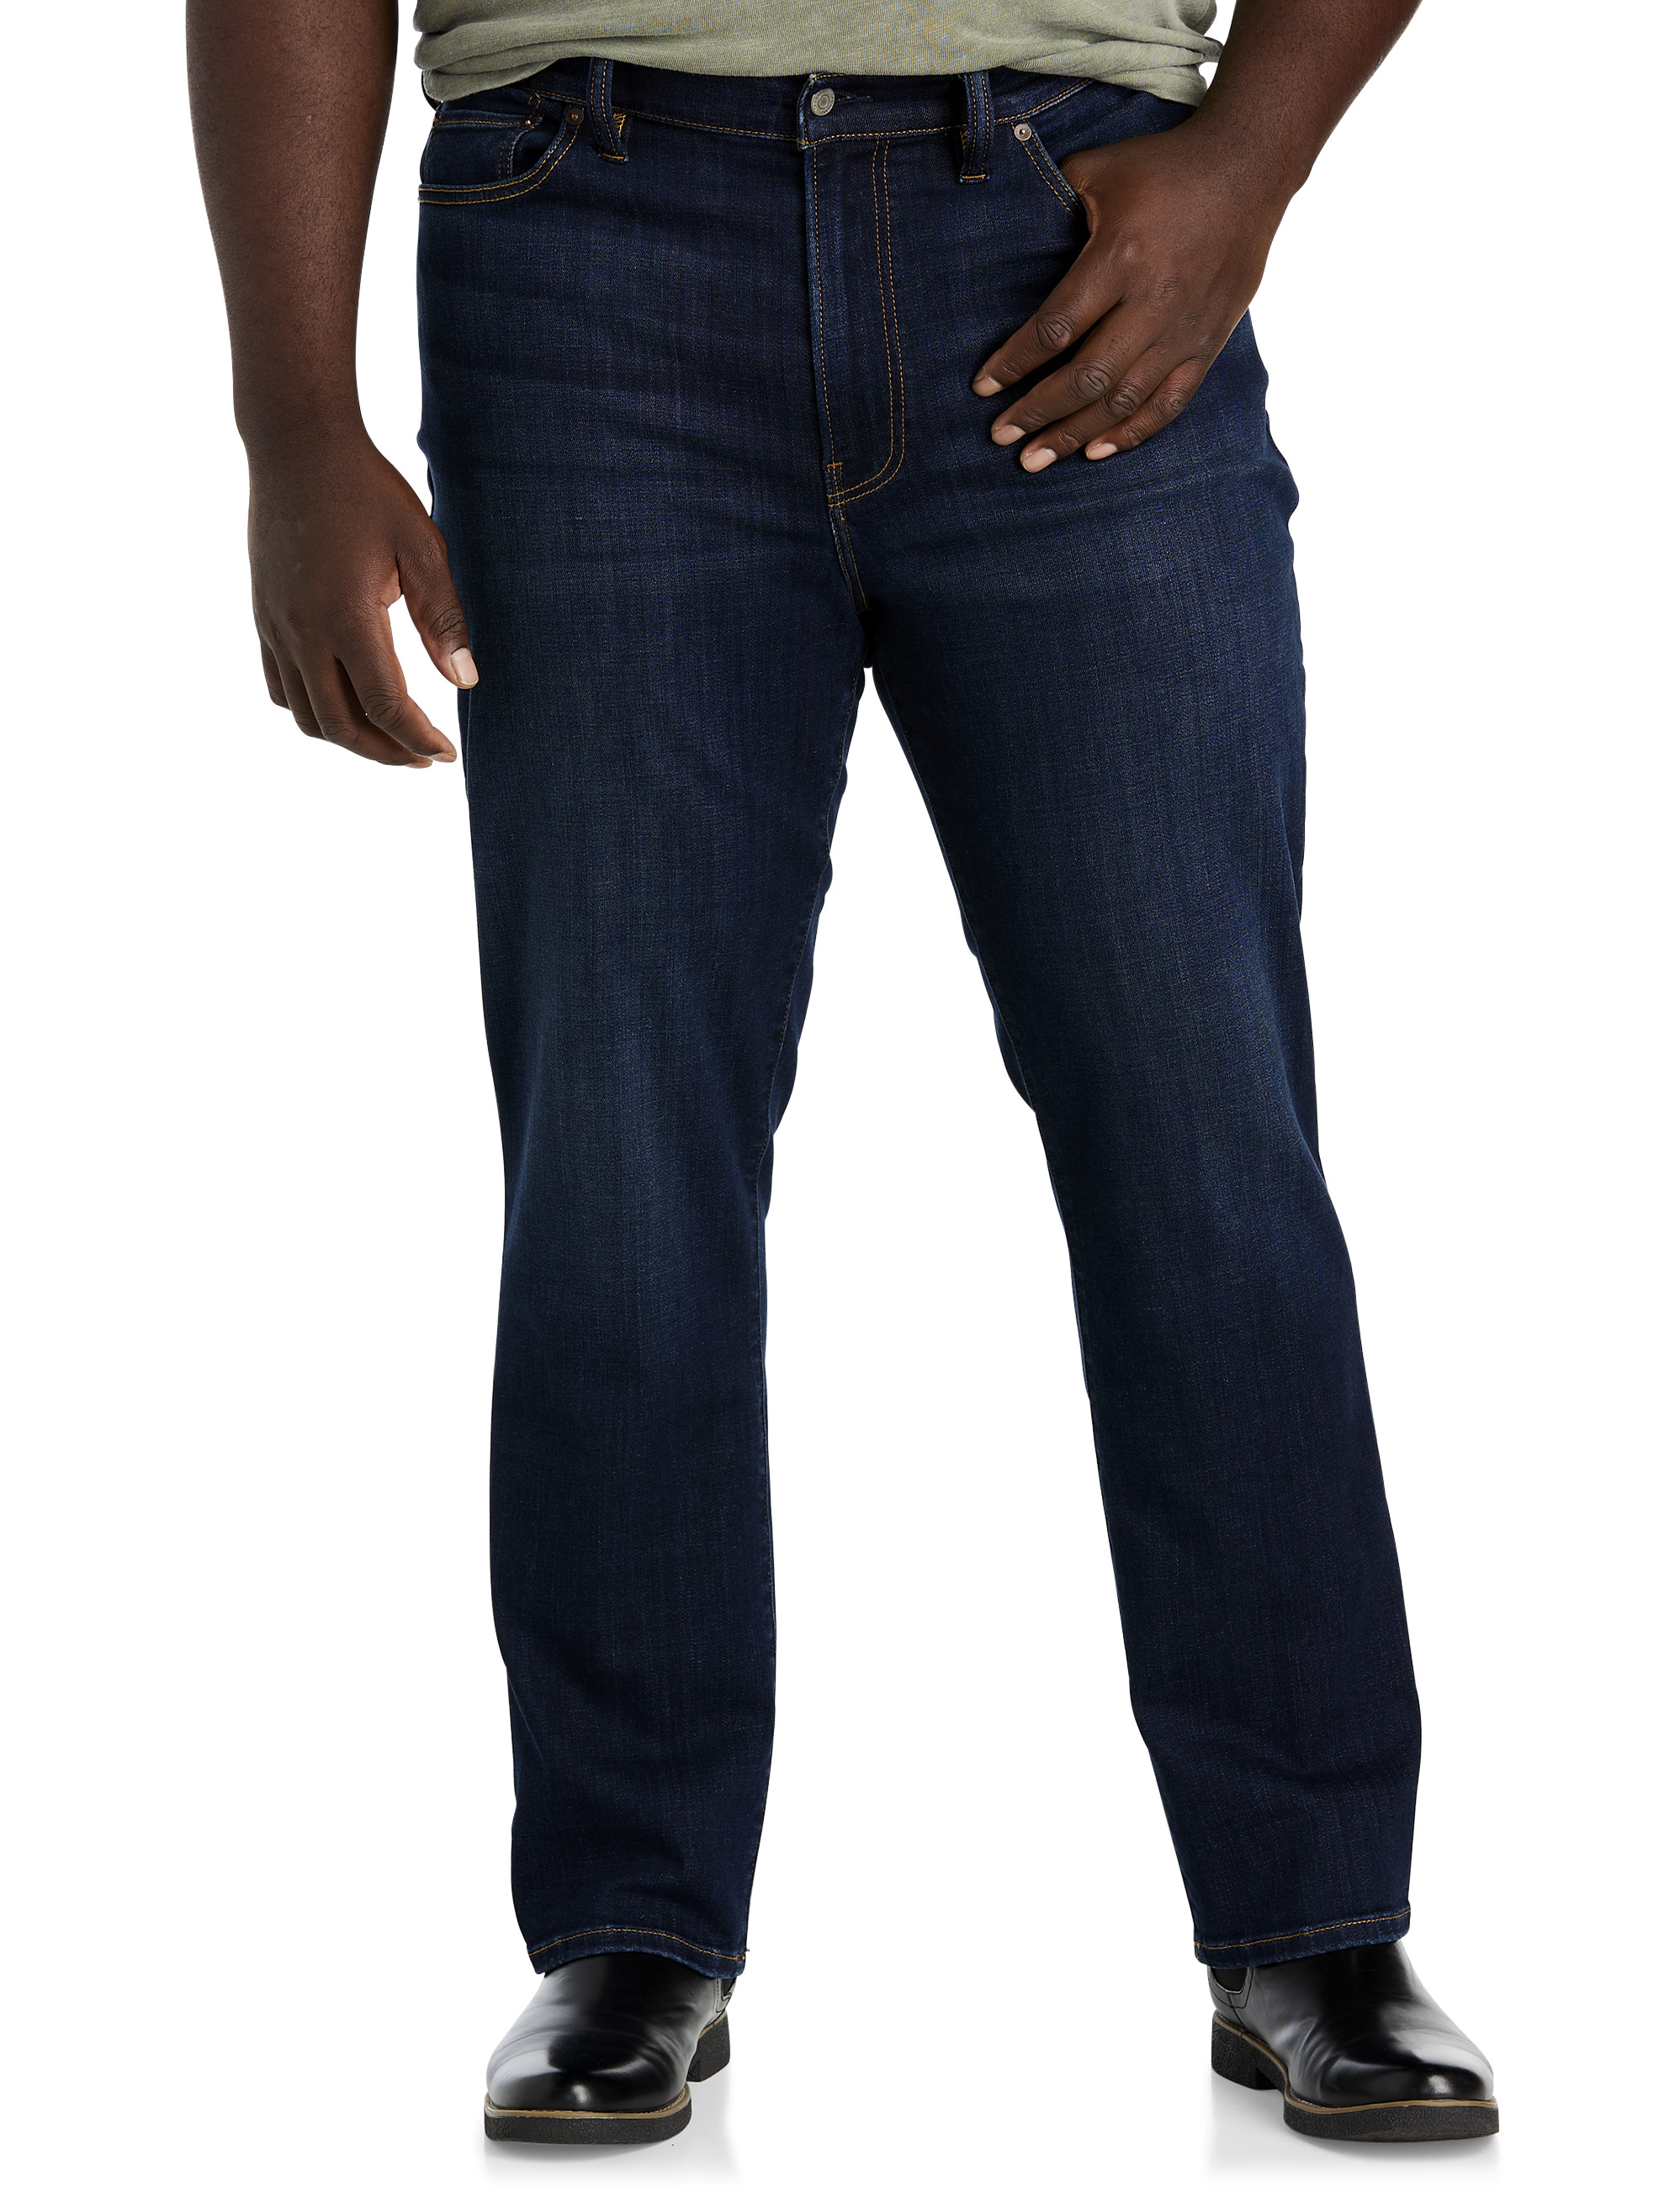 Falcon Athletic-Fit Stretch Jeans